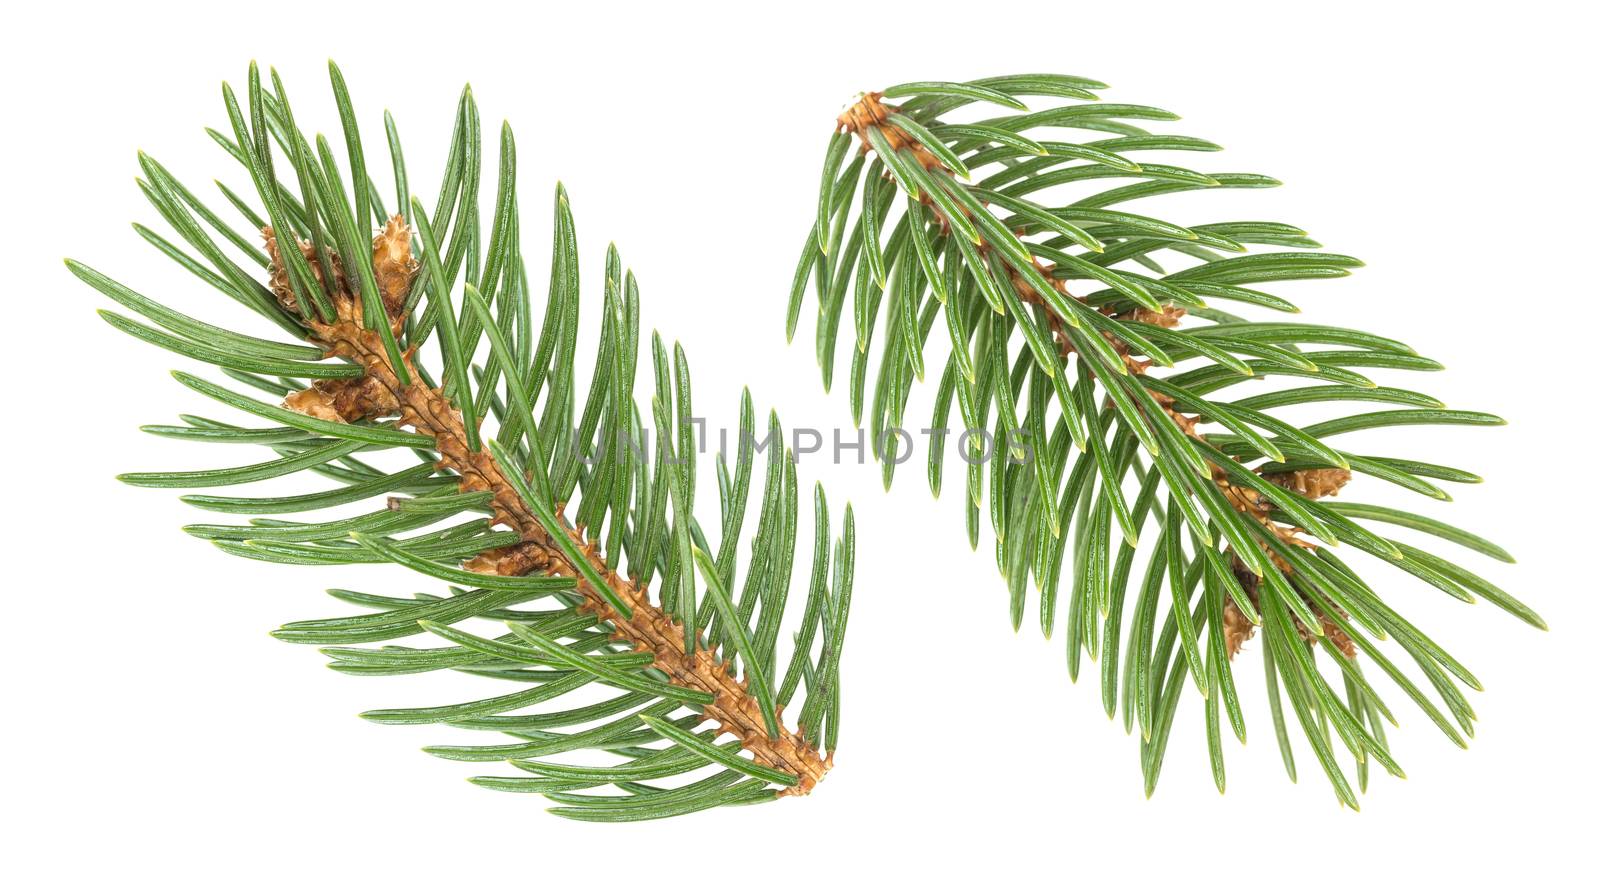 Fir tree branch isolated on white background by xamtiw